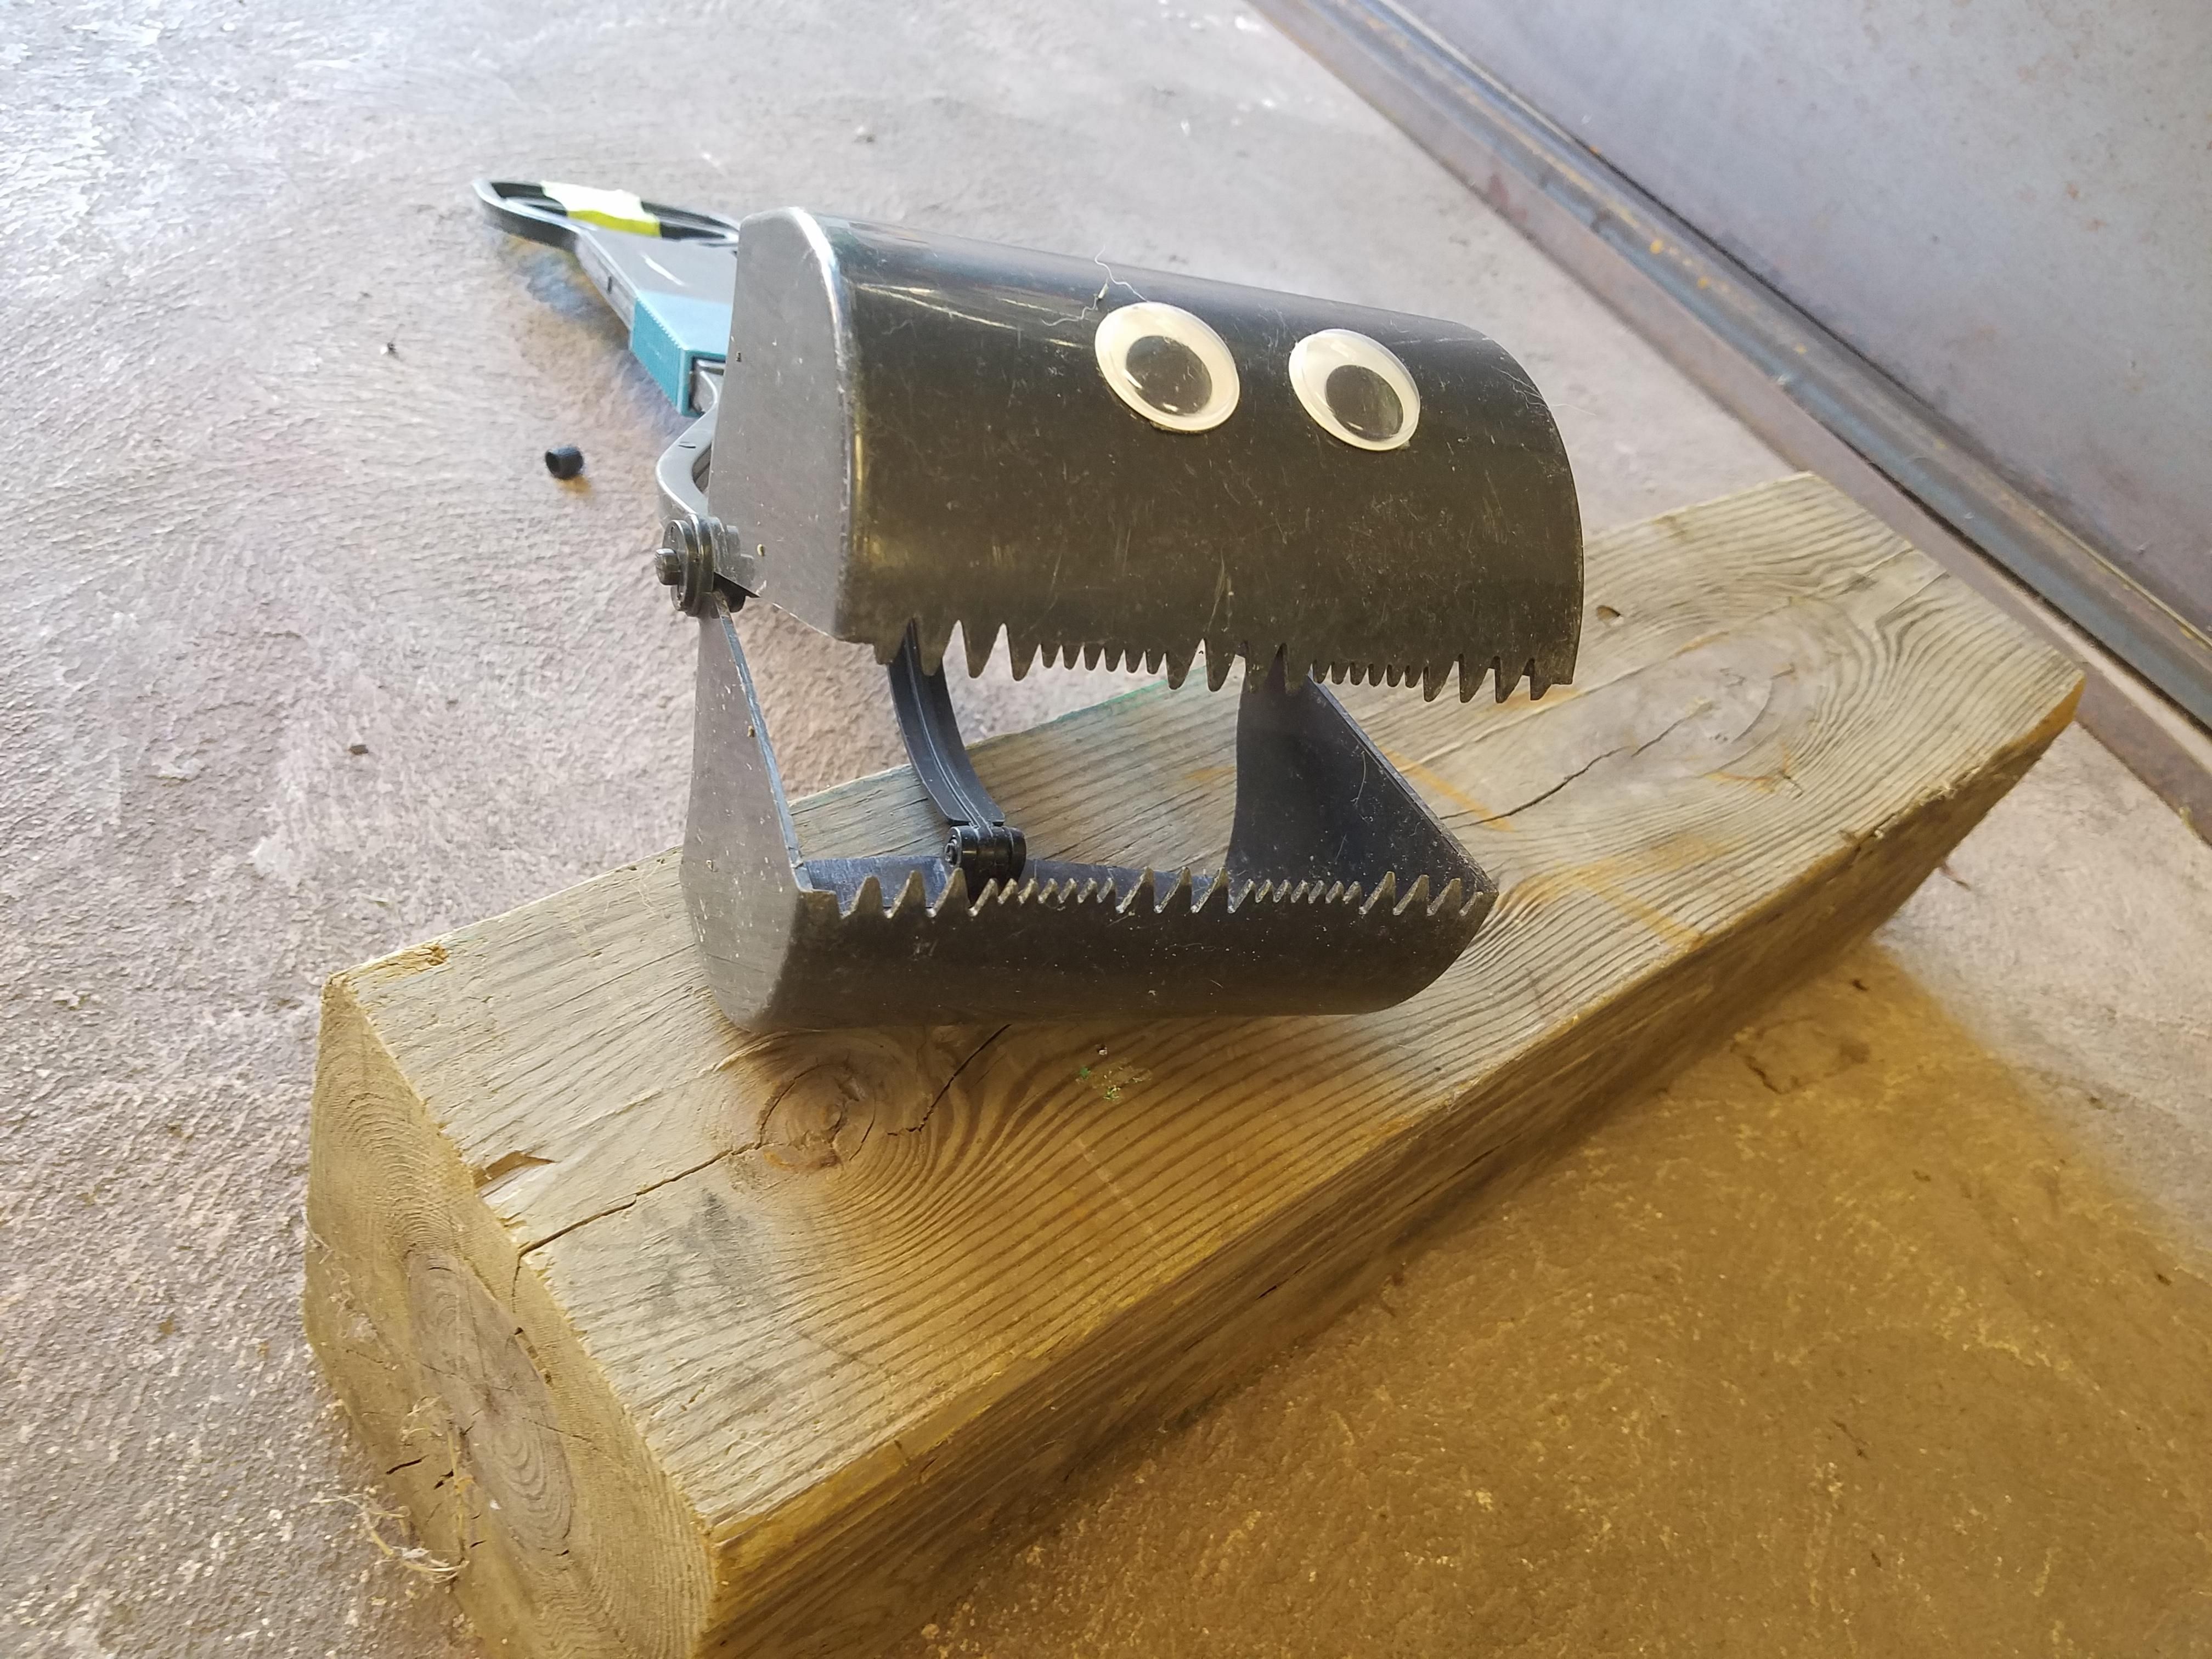 I put googly eyes on my pooper scooper so I can chase the dogs around the yard with it saying "give me your poopy!!!!"